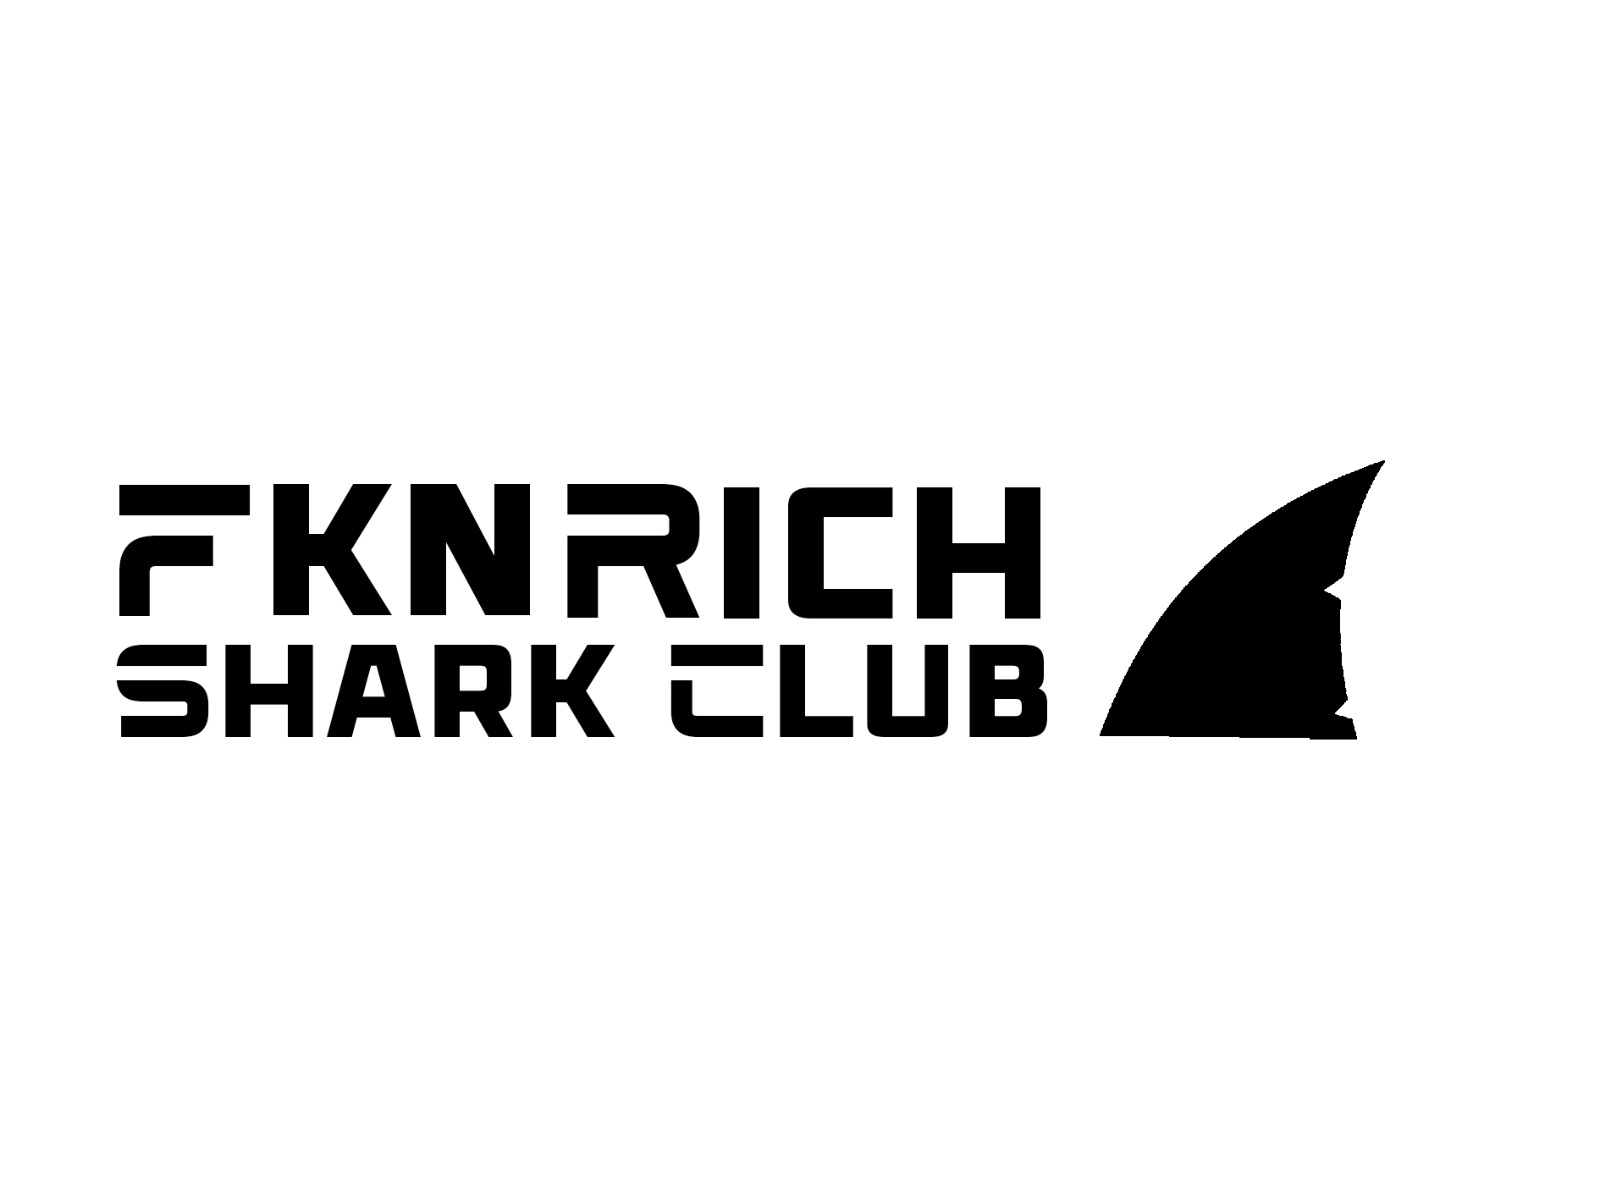 Swimming With The Sharks: NFT Powerhouse FKN Rich Shark Club Shares Their Secrets To Success In A Booming Industry